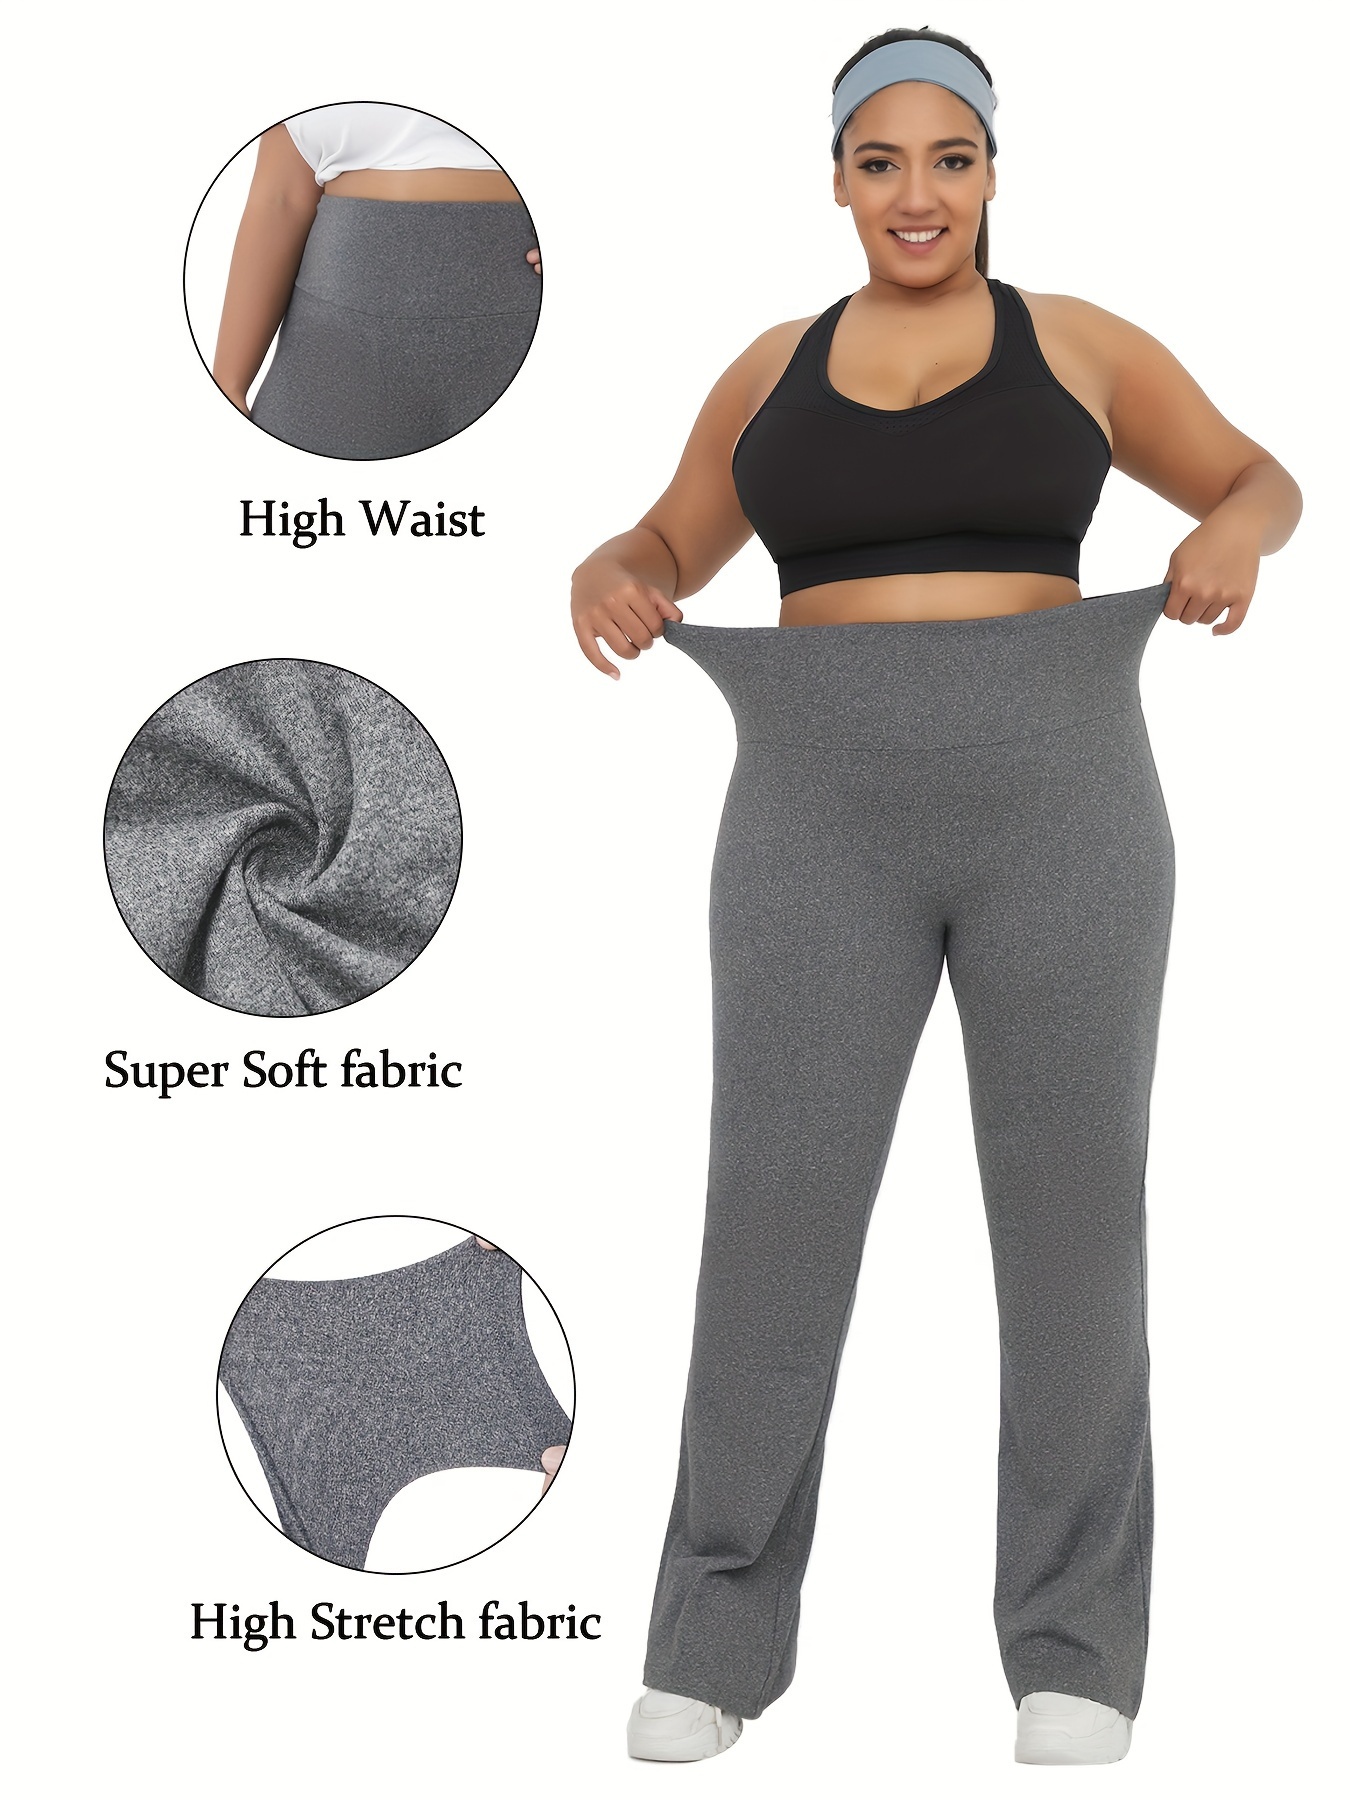 Women's Plus Size High Waist Stretchy Solid Flare Leg Pants Soft